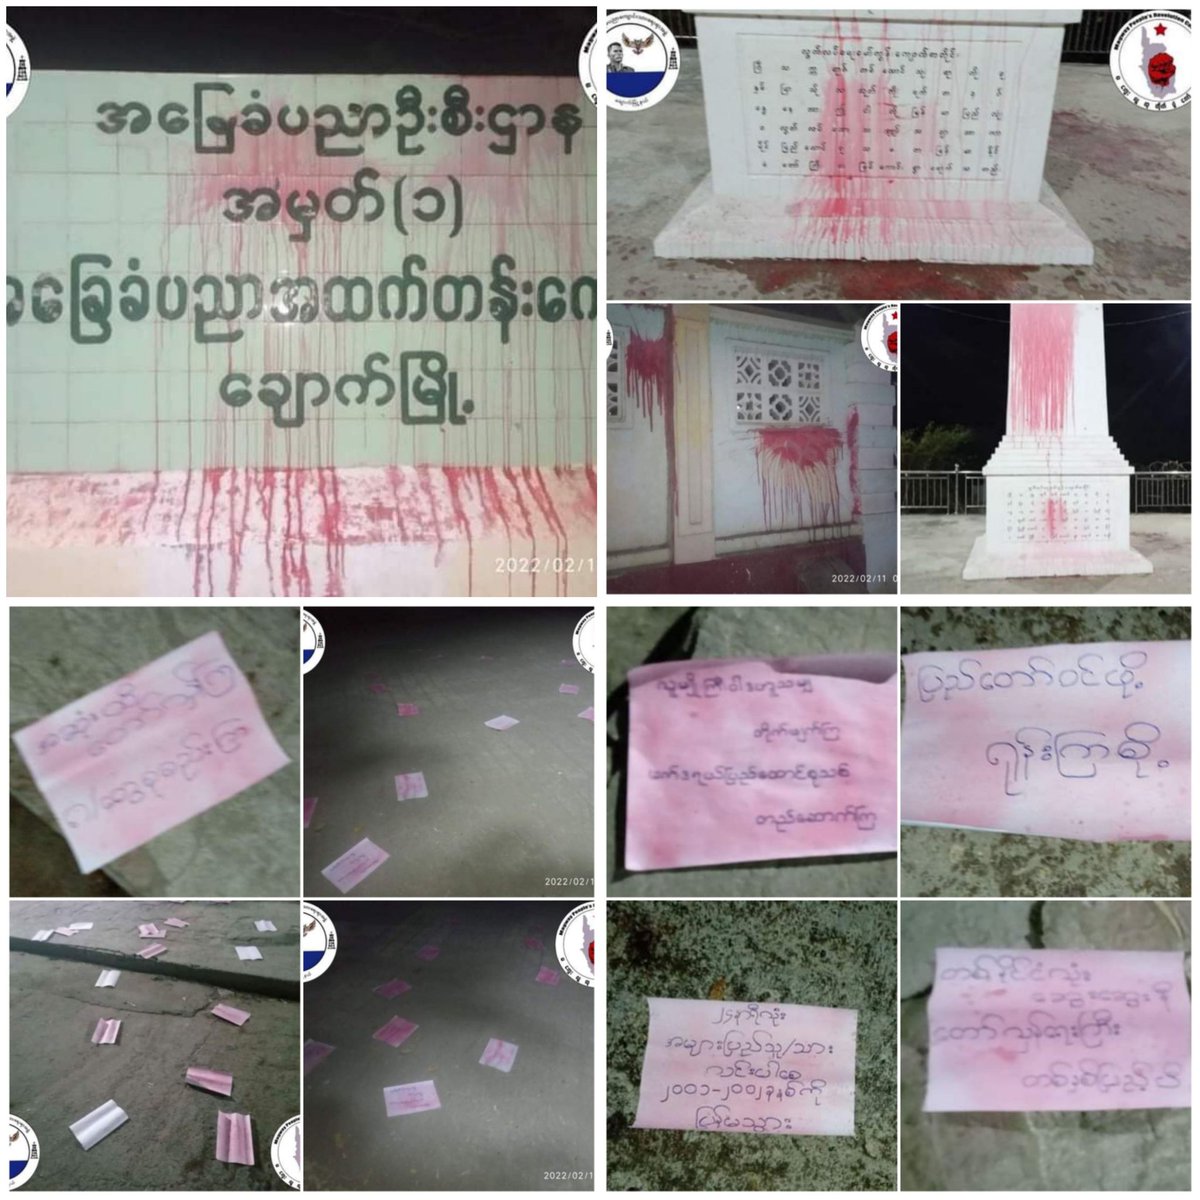 Basic Education High School Student - Chauk tsp & Magway People's Revolution Committee staged RED PAINT STRIKE against the military junta in Magway's #Chauk tsp this morning.

#Telenor_StopTheSale
#2022Feb11Coup
#WhatsHappeningInMyanmar